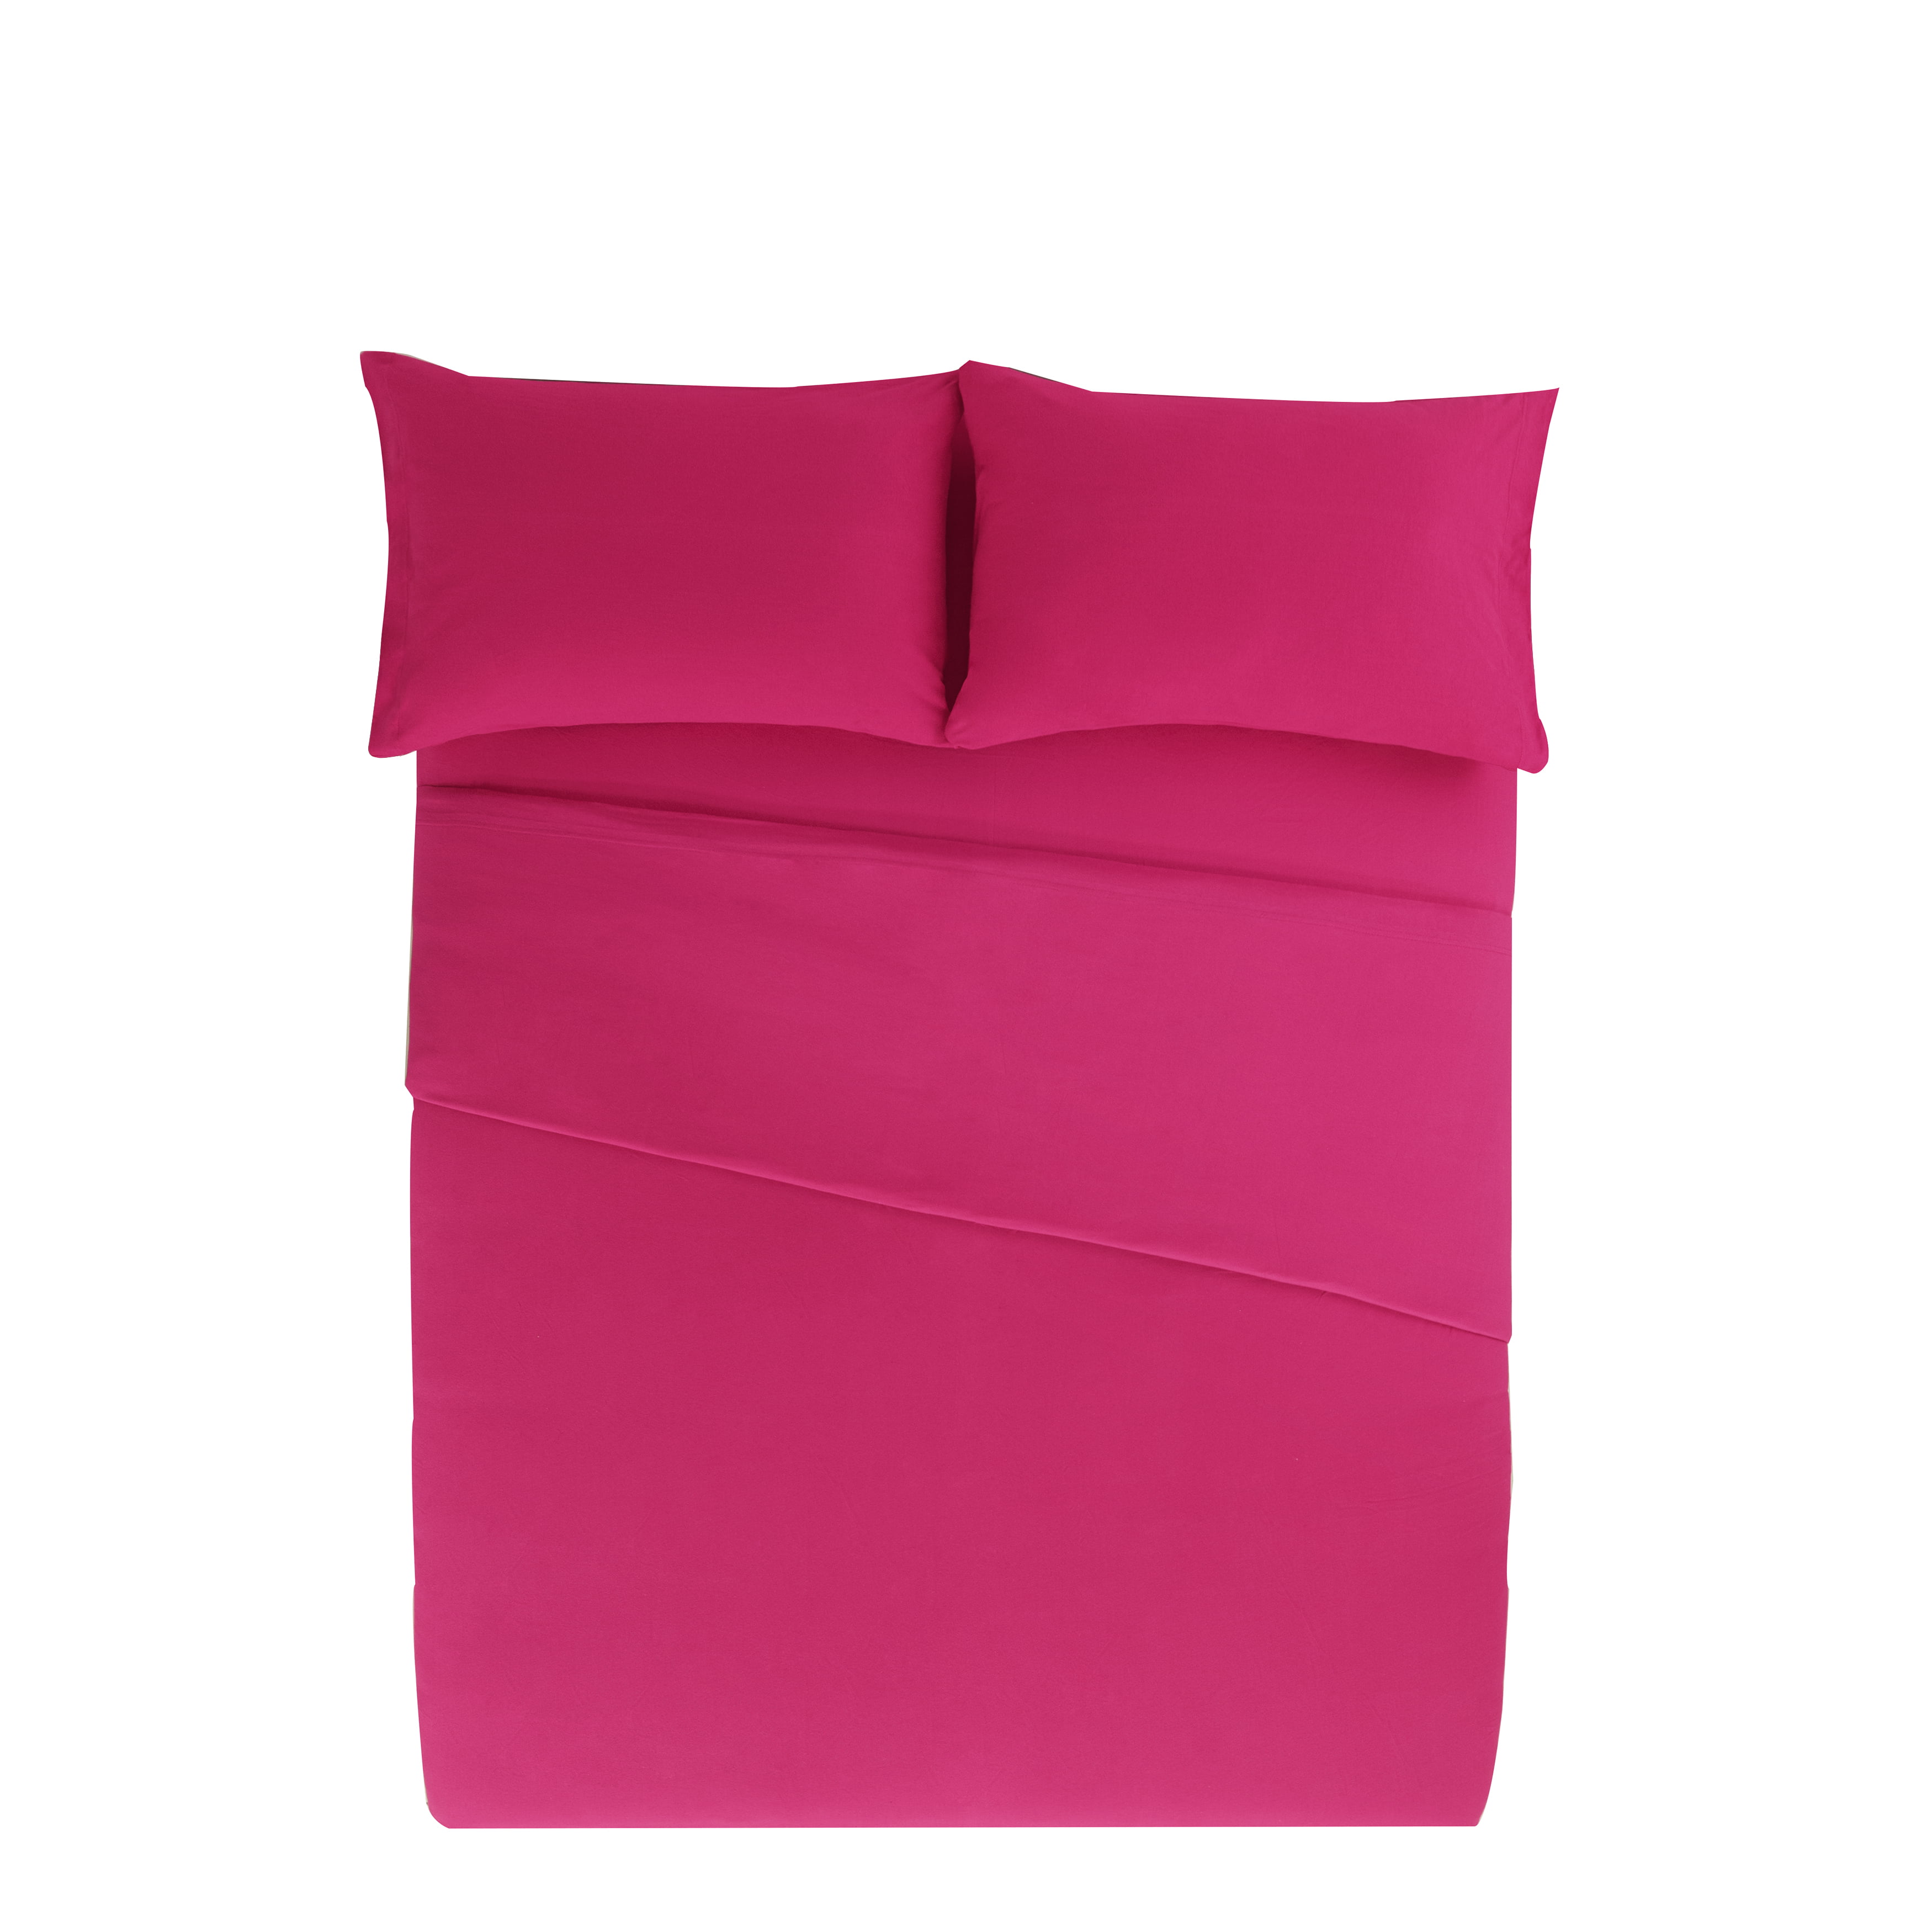 pink jersey knit sheets full